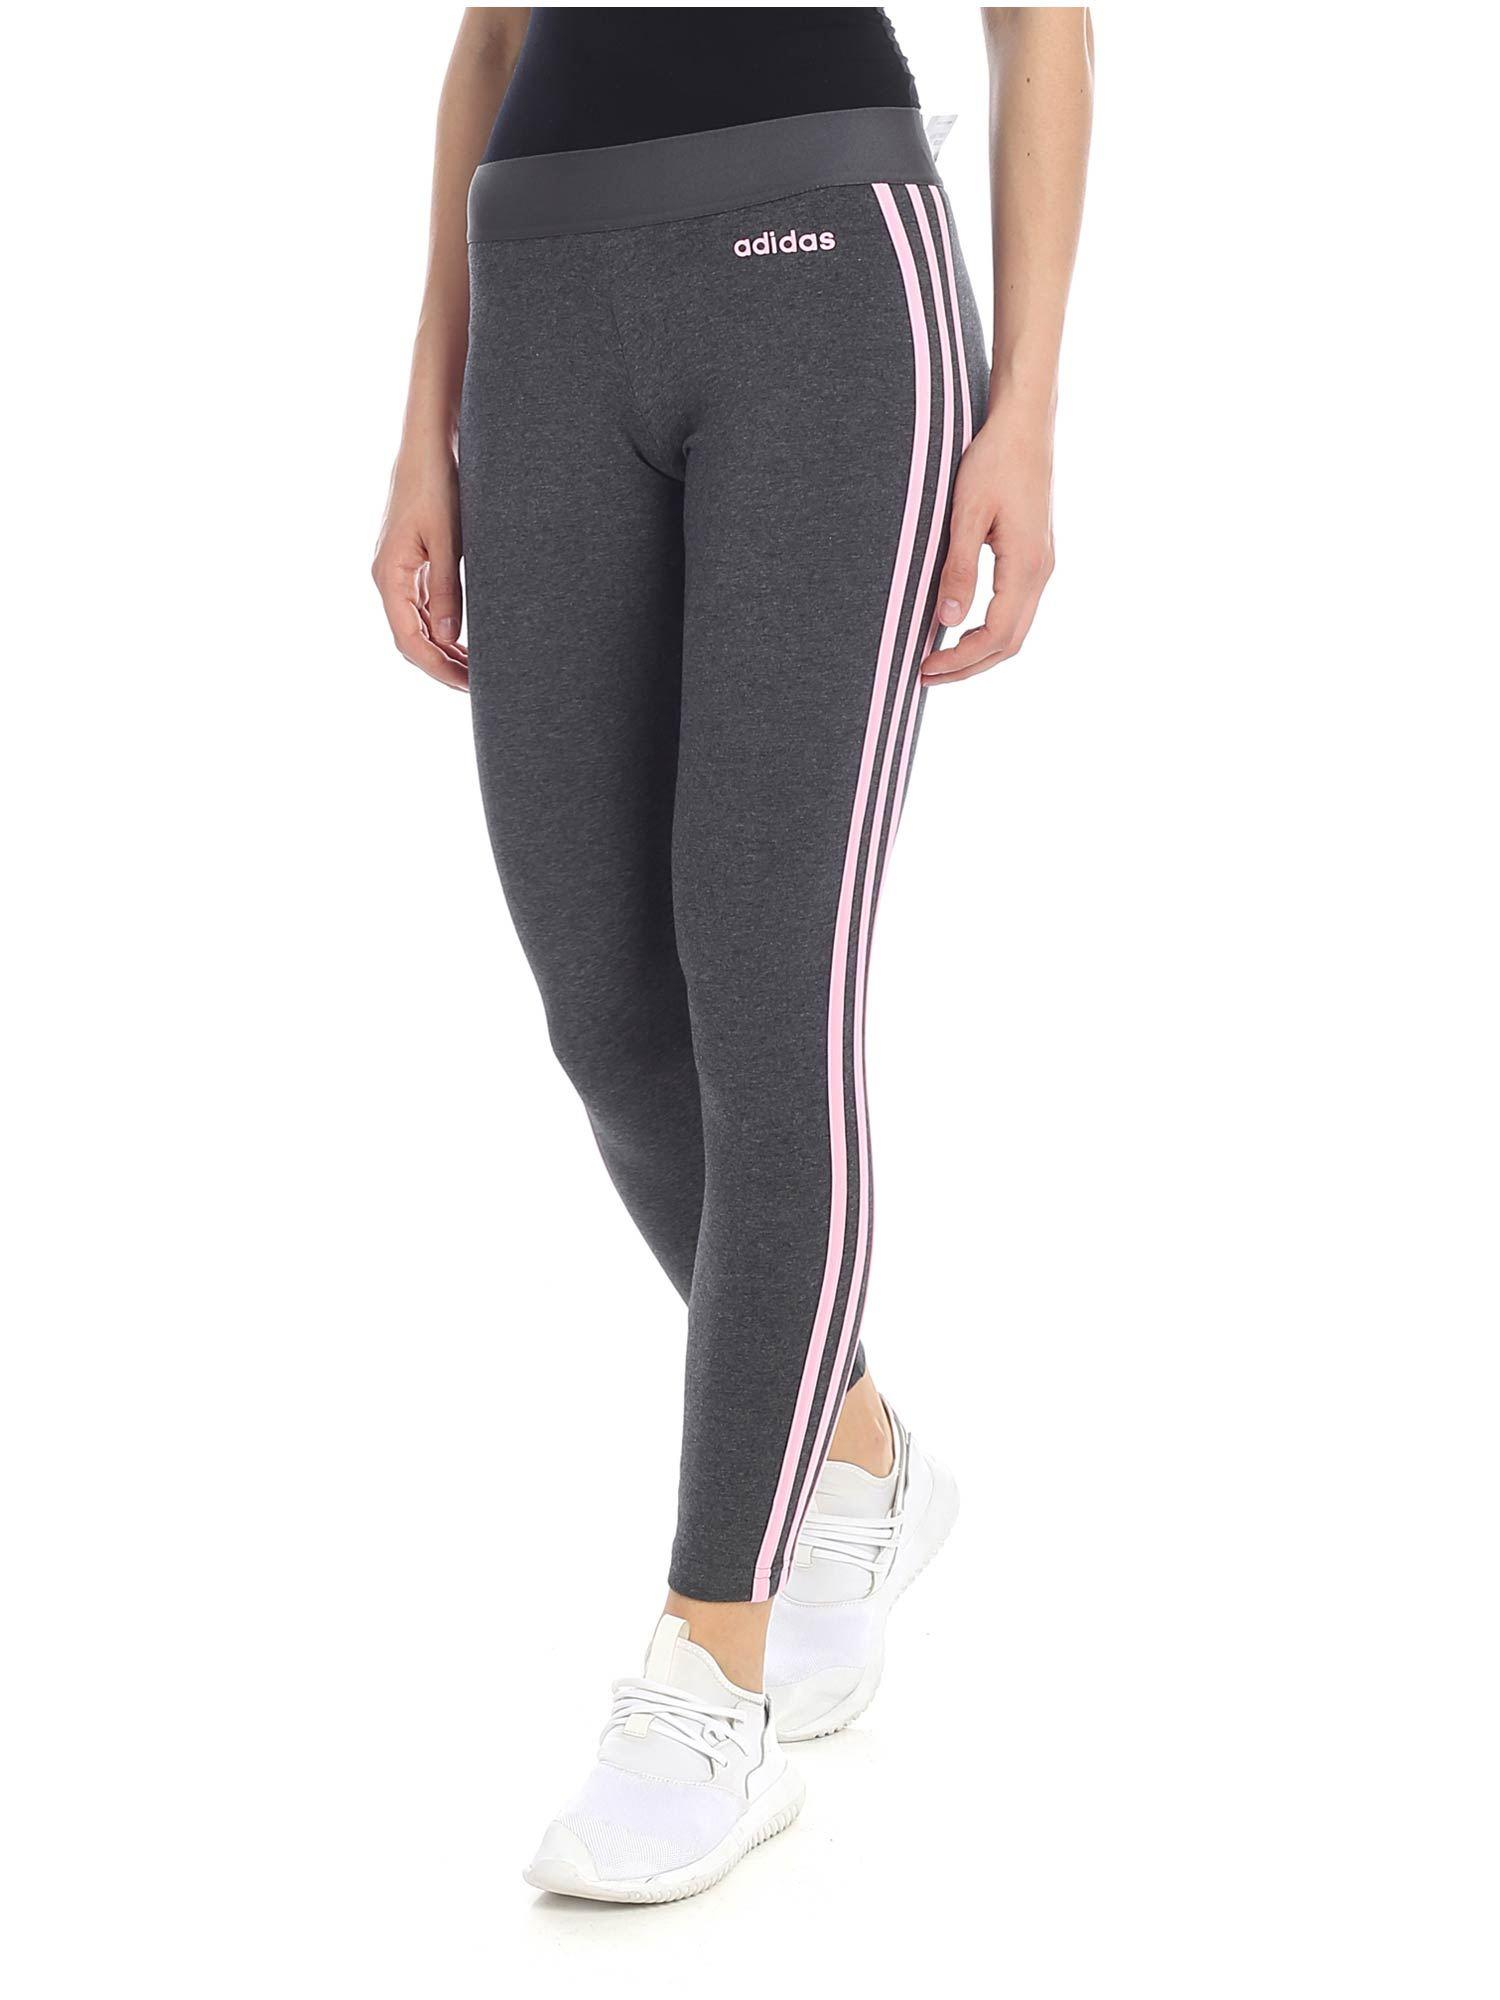 adidas Cotton Grey leggings With Pink 